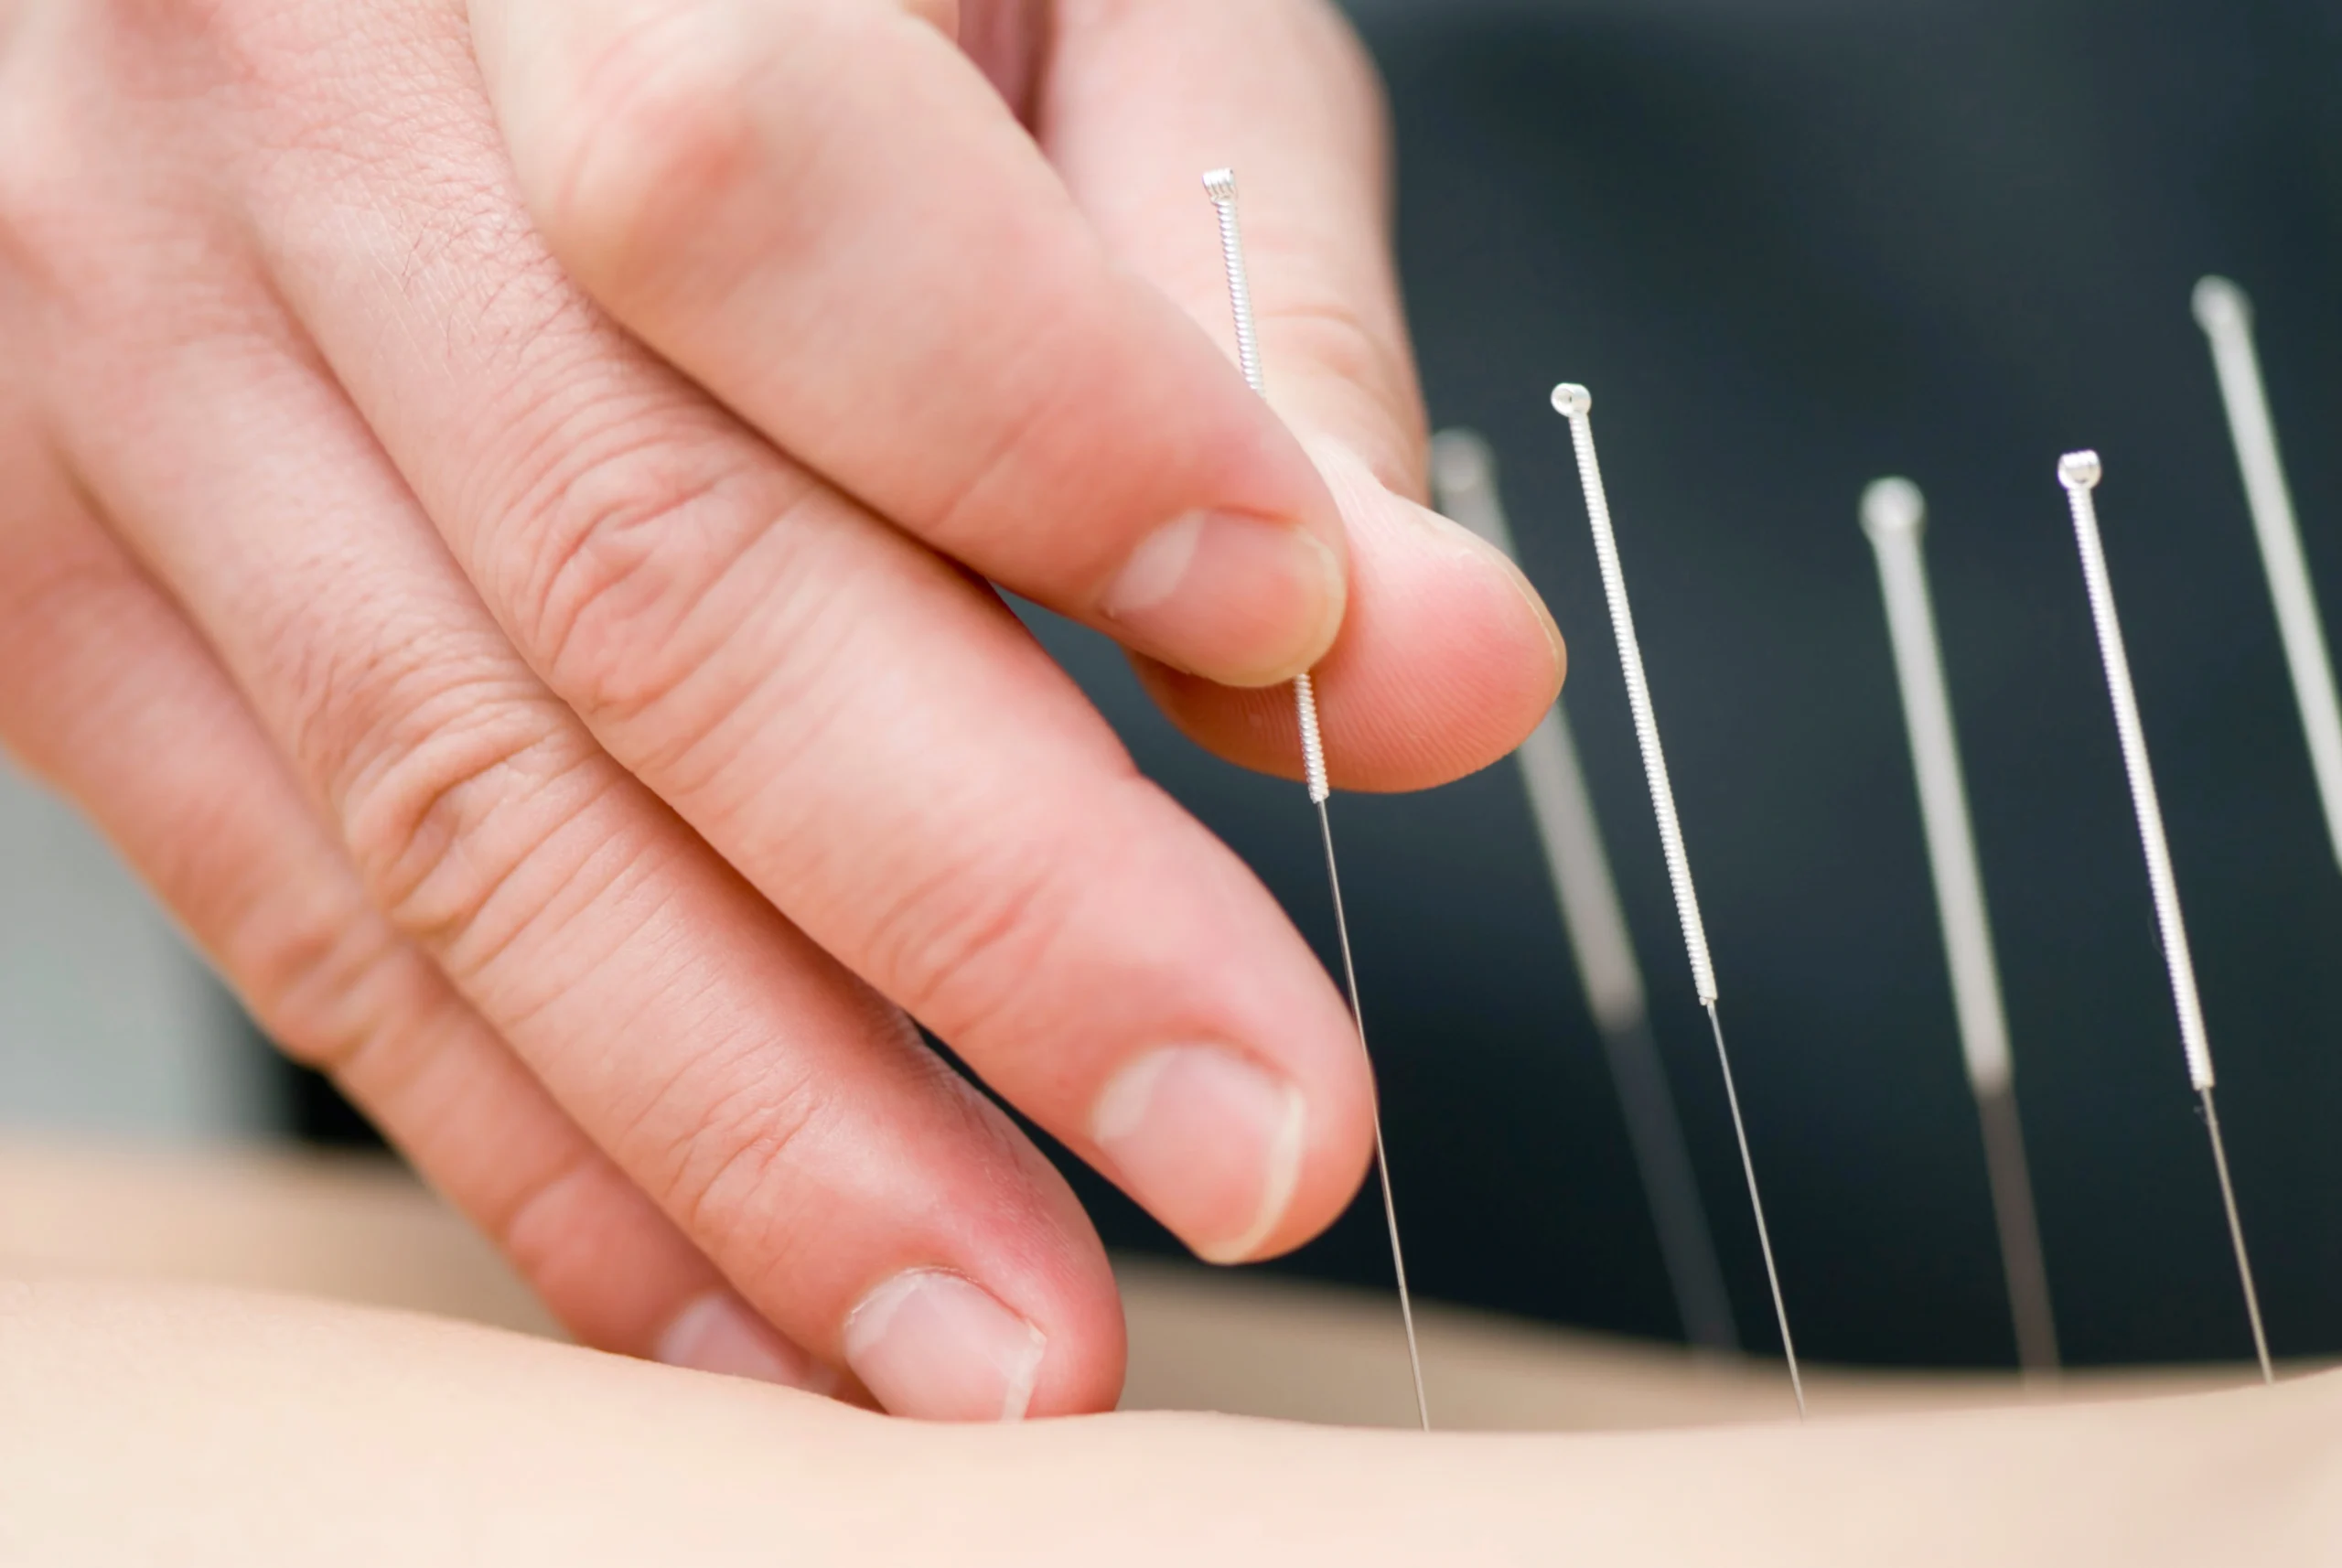 Acupuncture needles | Canvas Skin Clinic | Tampa, FL